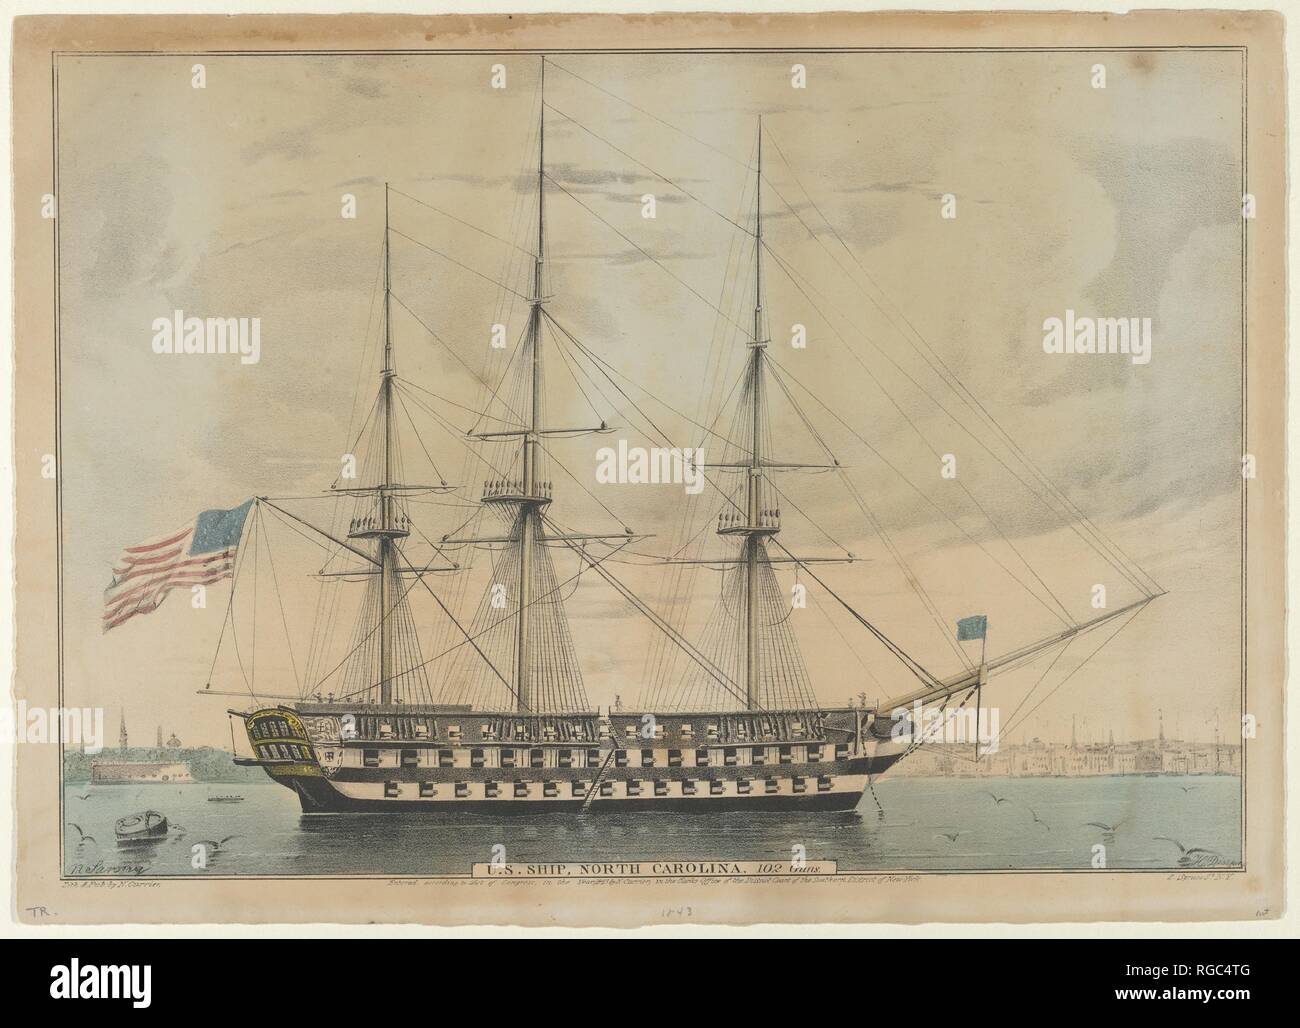 U. S. Ship North Carolina, 102 Guns. Artist: Napoleon Sarony (American (born Canada), Quebec 1821-1896 New York). Dimensions: image: 9 1/8 x 13 1/8 in. (23.2 x 33.4 cm)  sheet: 10 x 14 in. (25.4 x 35.5 cm). Lithographer: Lithographed and published by Nathaniel Currier (American, Roxbury, Massachusetts 1813-1888 New York). Date: 1843.  A marine print. A three-masted ship faces right with an American flag flying off the stern. The New York City skyline is visible behind the ship; Castle Garden at left. Museum: Metropolitan Museum of Art, New York, USA. Author: Napoleon Sarony. CURRIER, NATHANIEL Stock Photo